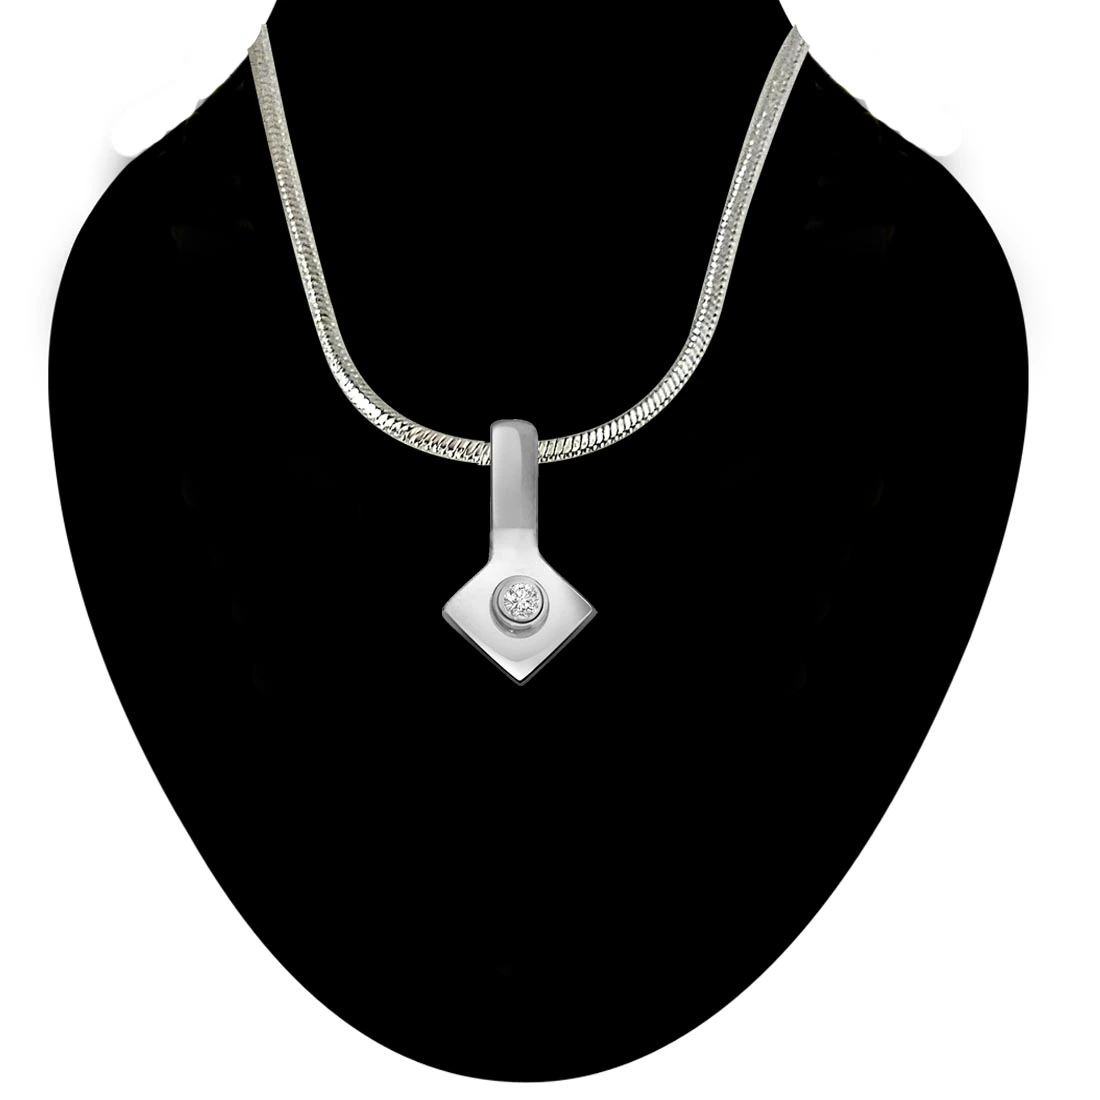 Pretty Little - Real Diamond & Sterling Silver Pendant with 18 IN Chain (SDP165)